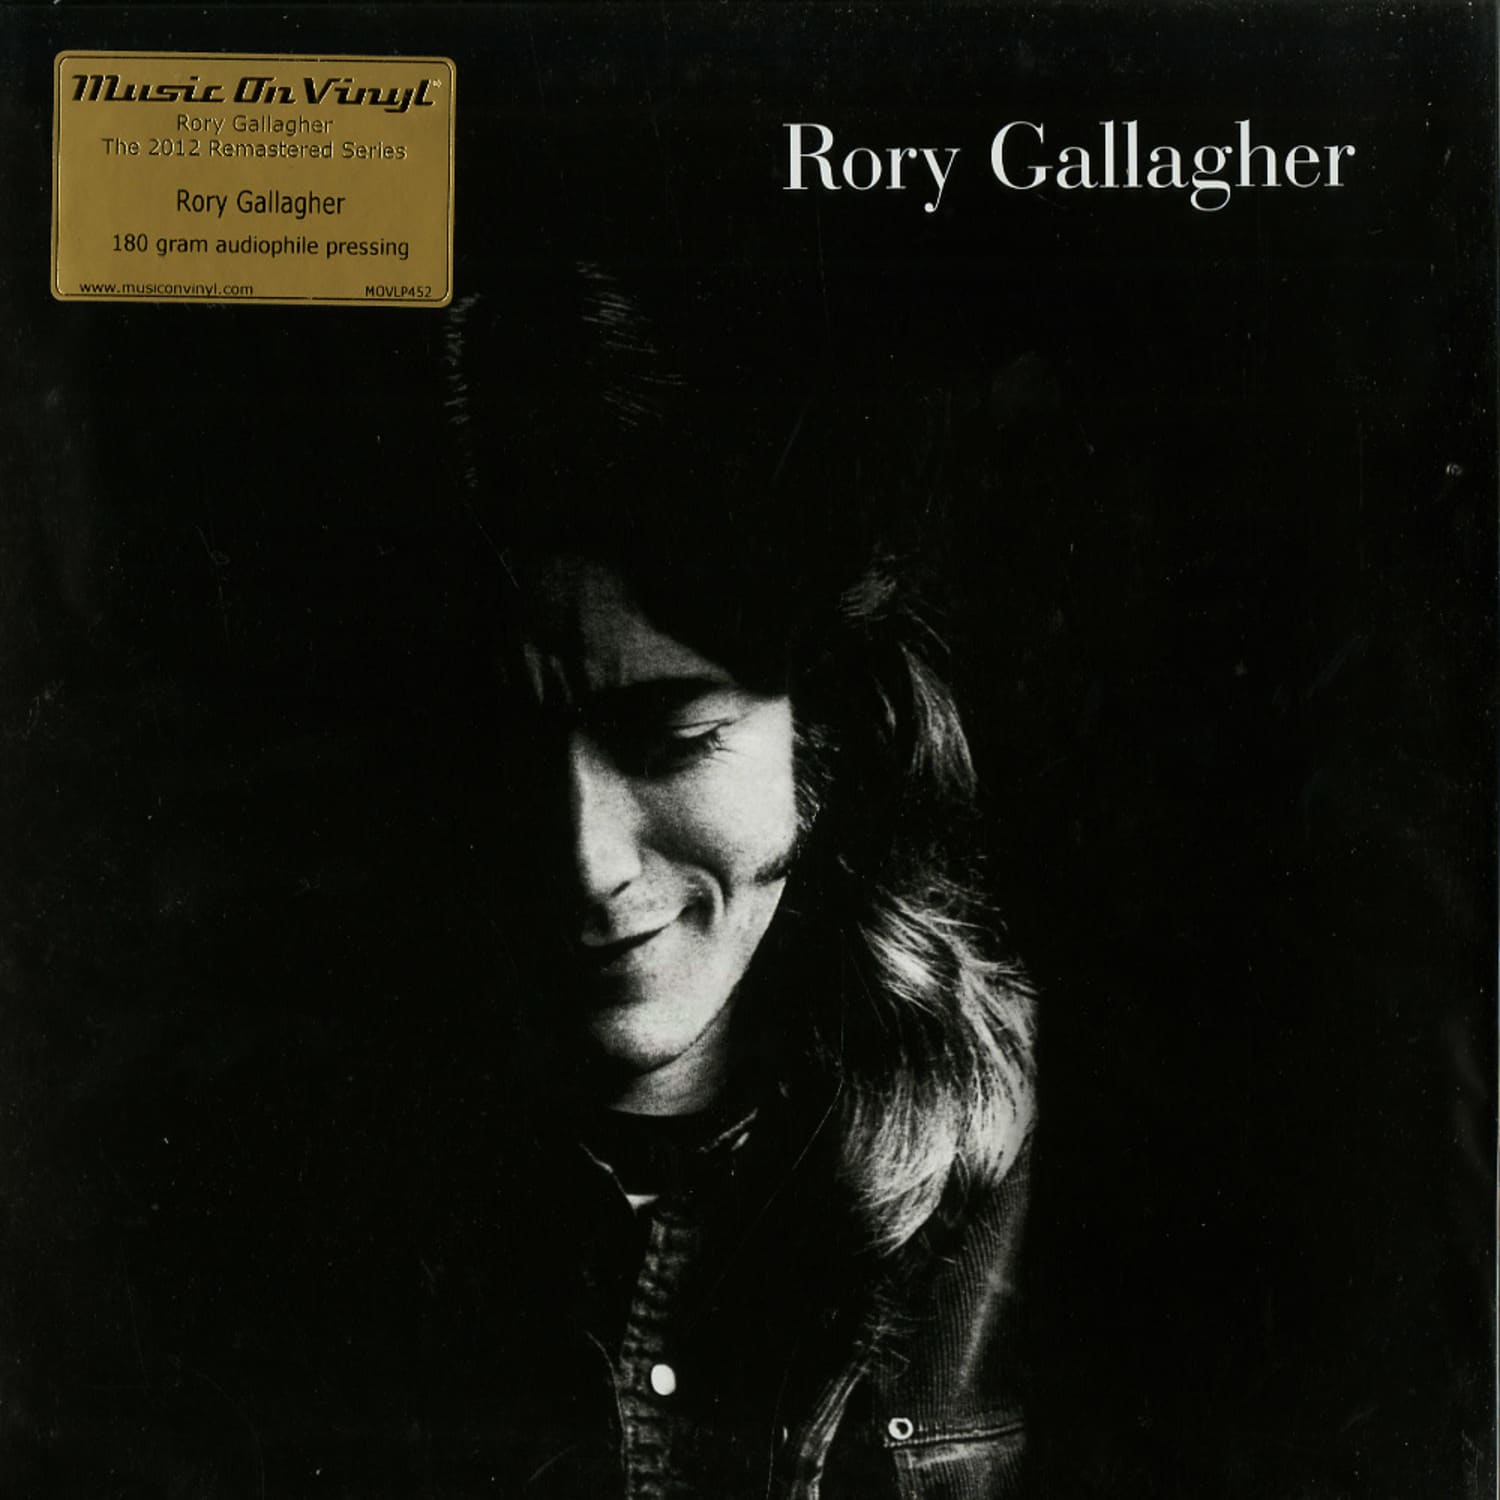 Rory Gallagher - RORY GALLAGHER 